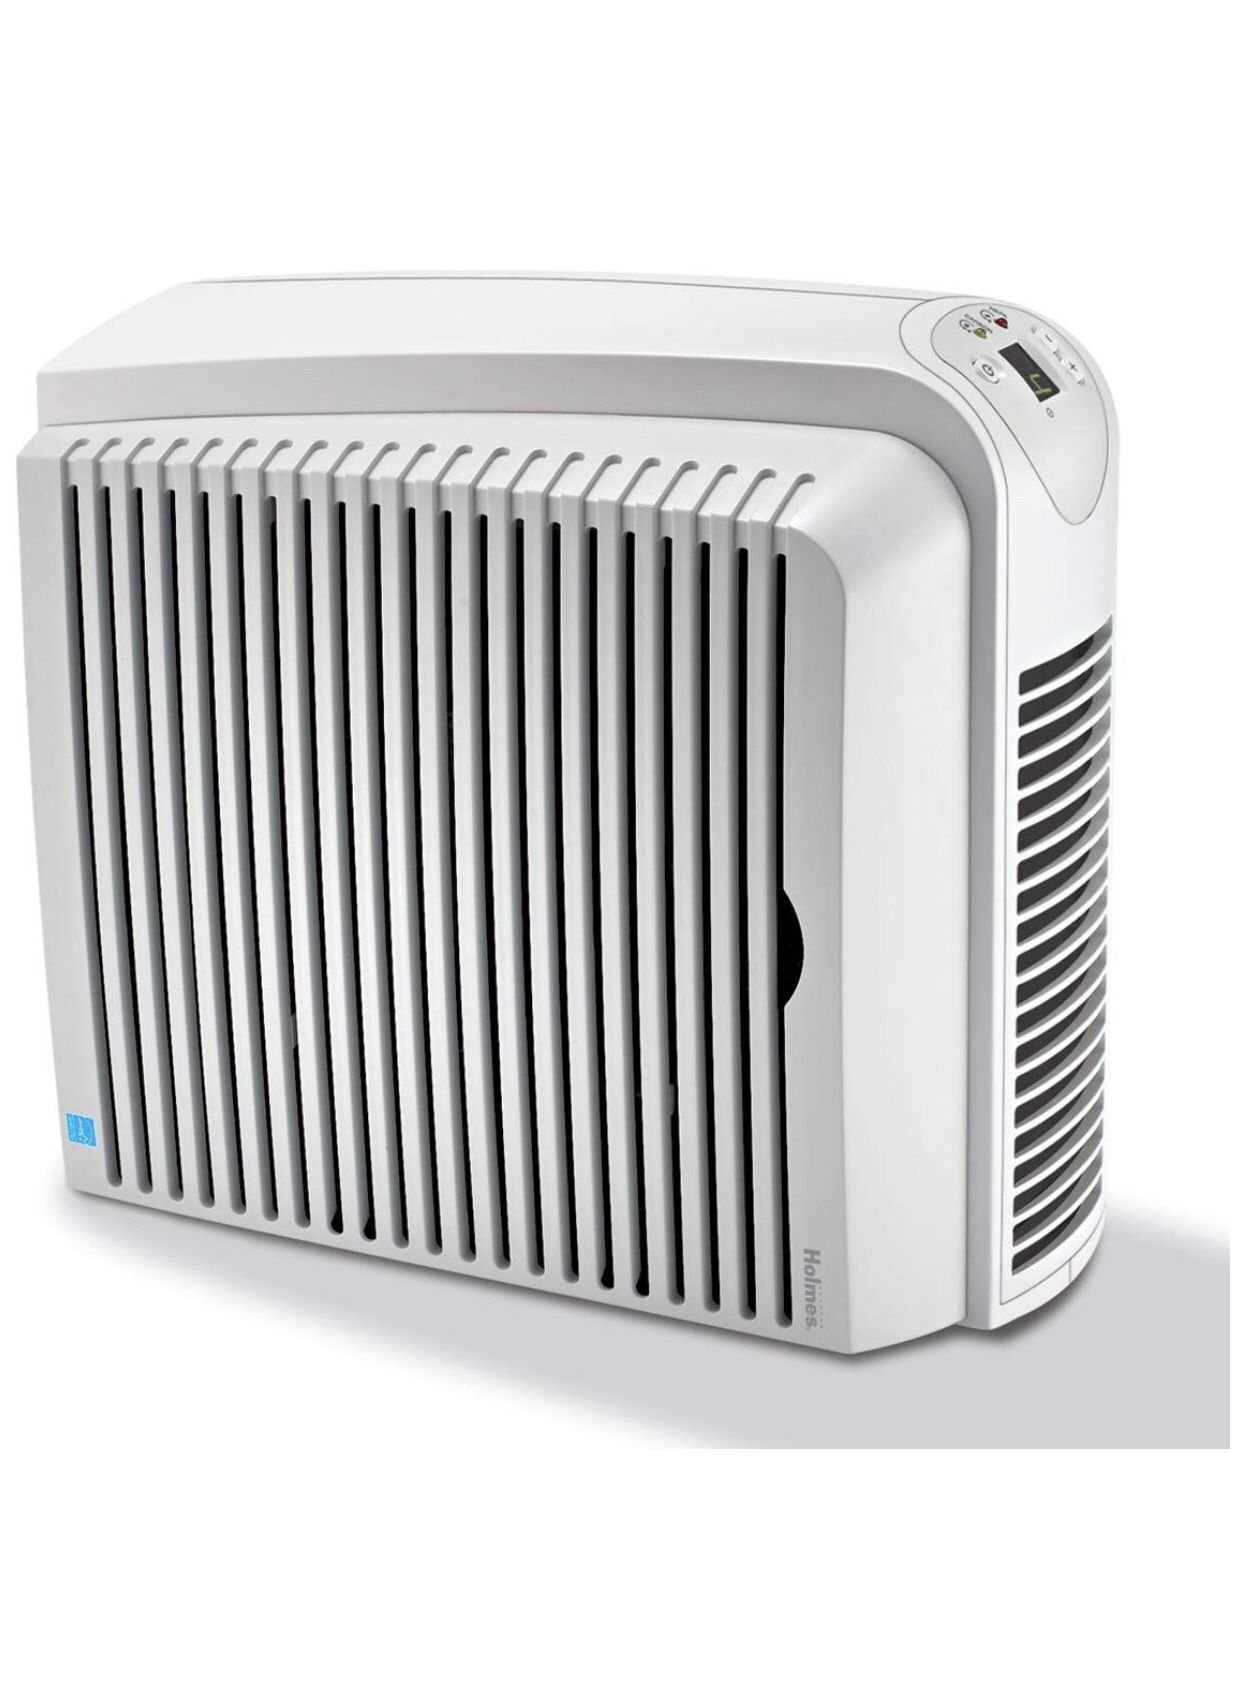 Air Purifier Holmes True HEPA Allergen Remover with Digital Display for Medium Spaces, White